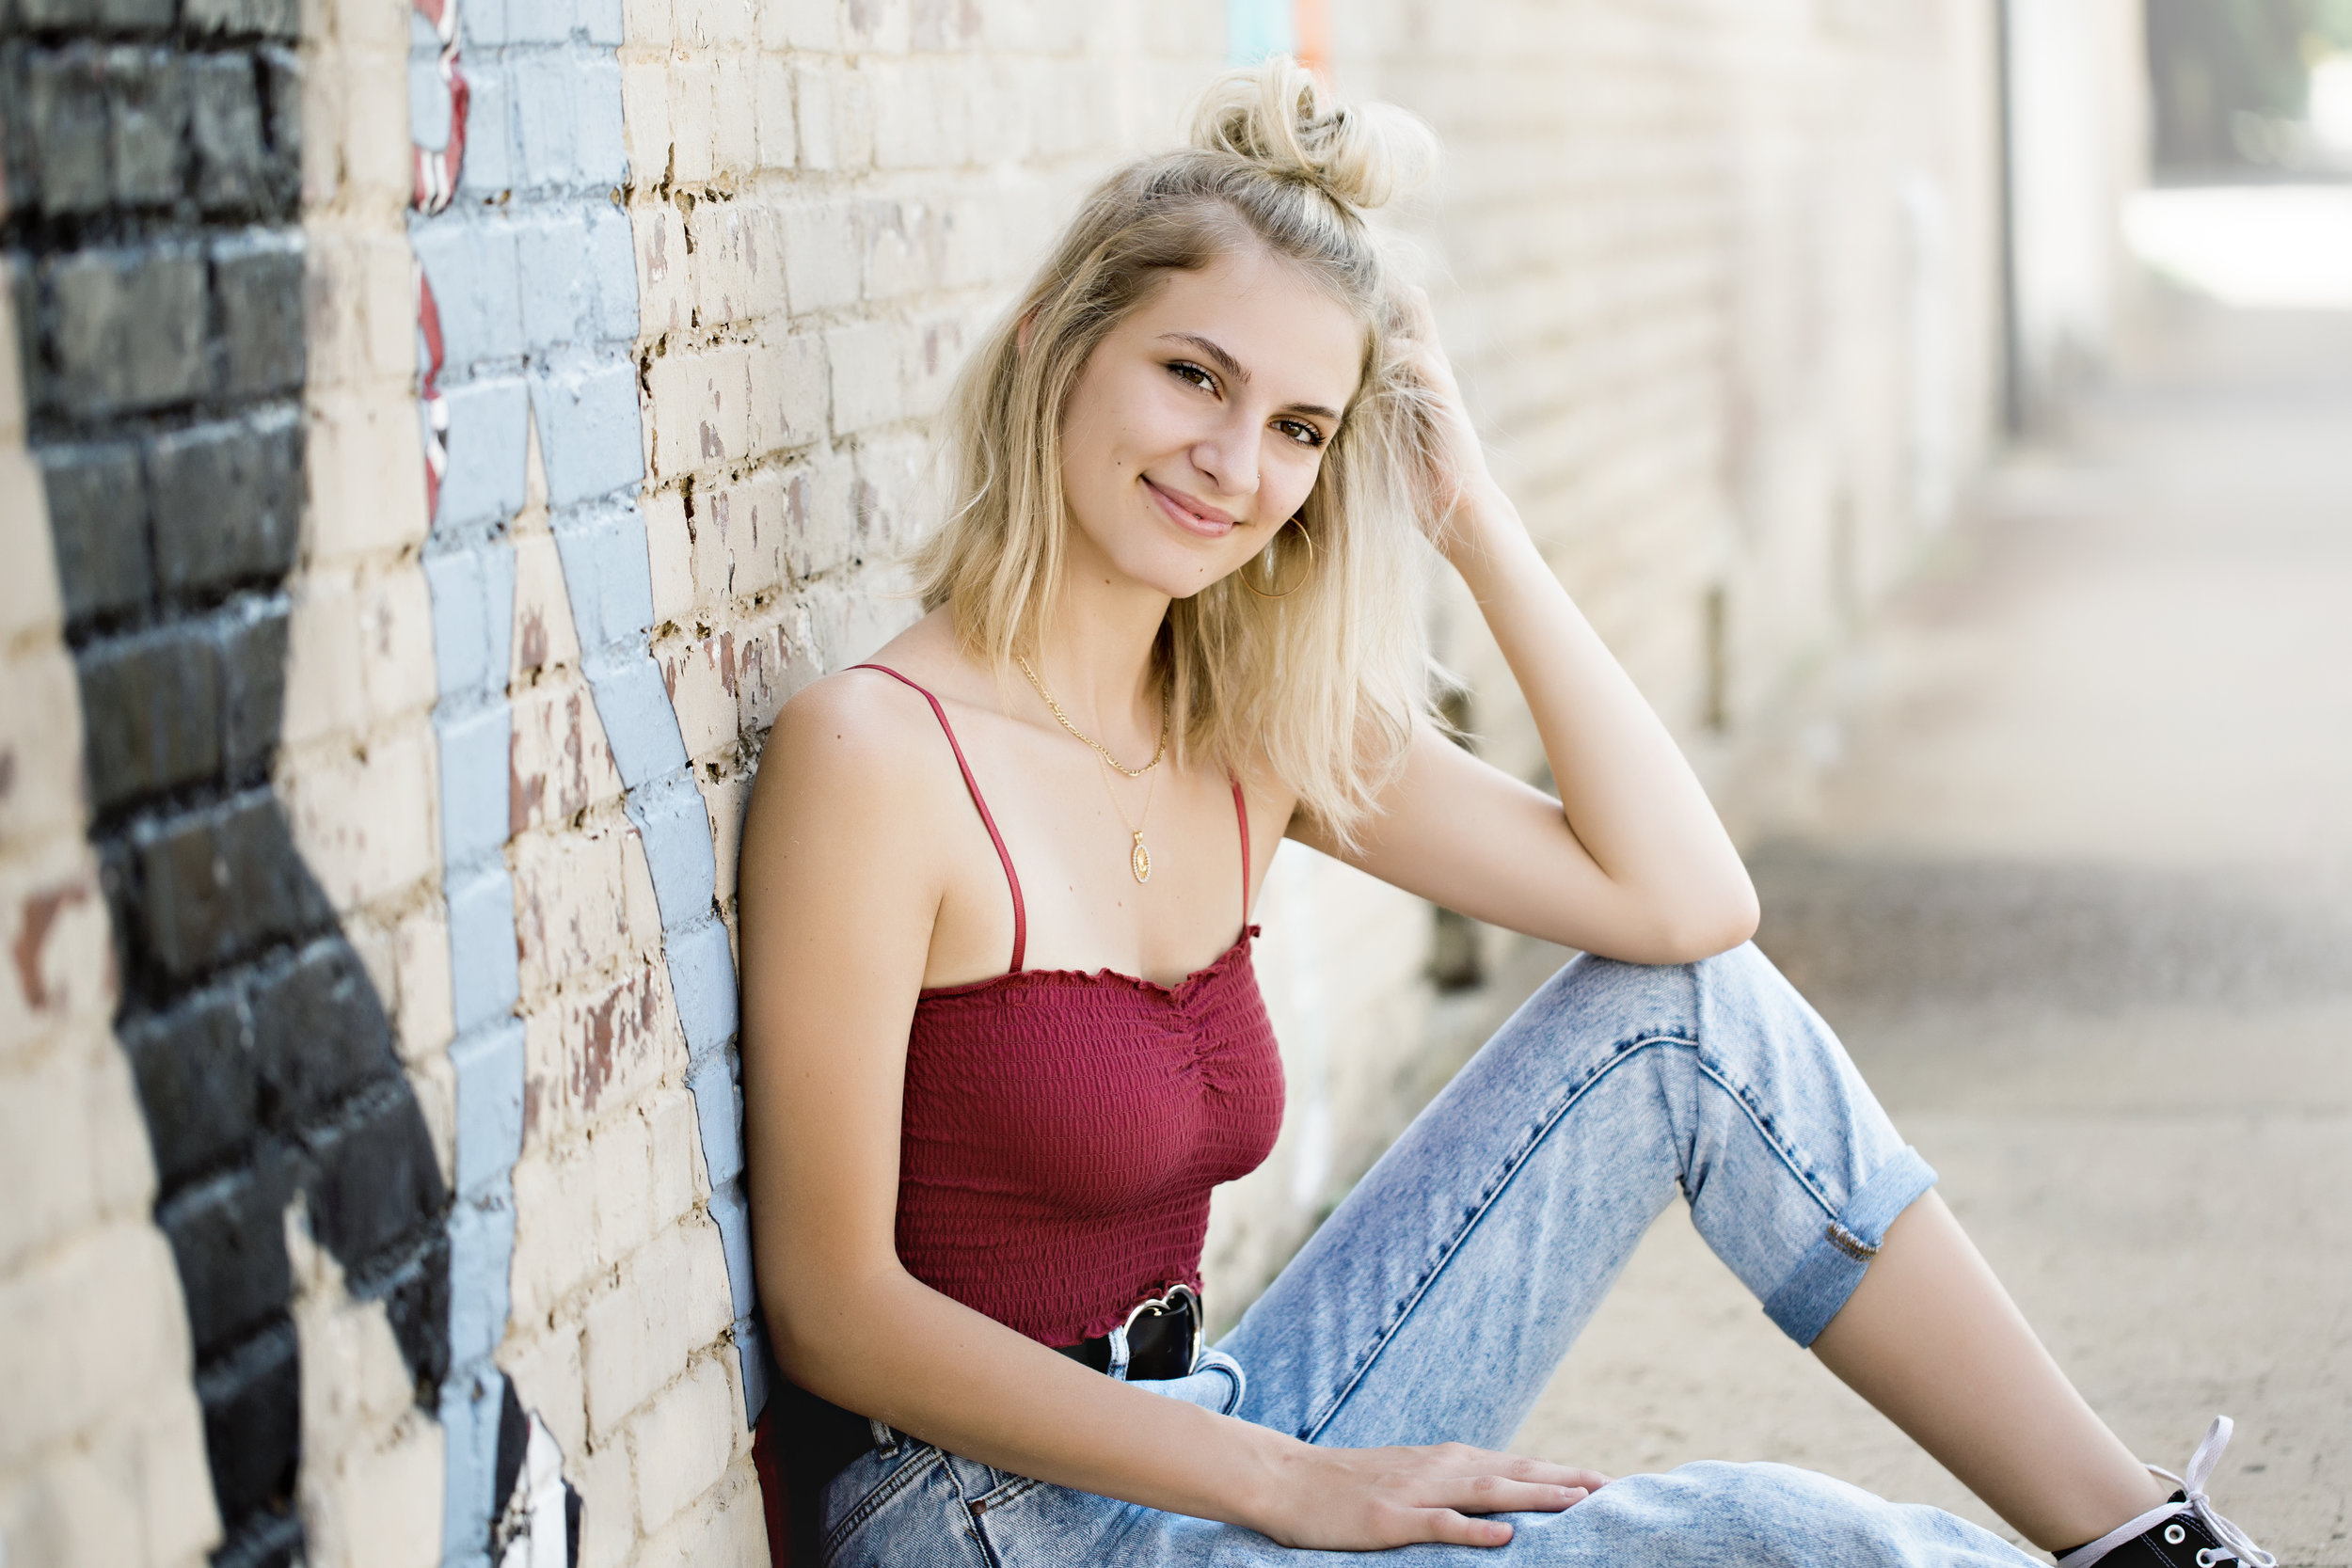 How To Rebuild Your Senior Photography Business After Relocating To A ...